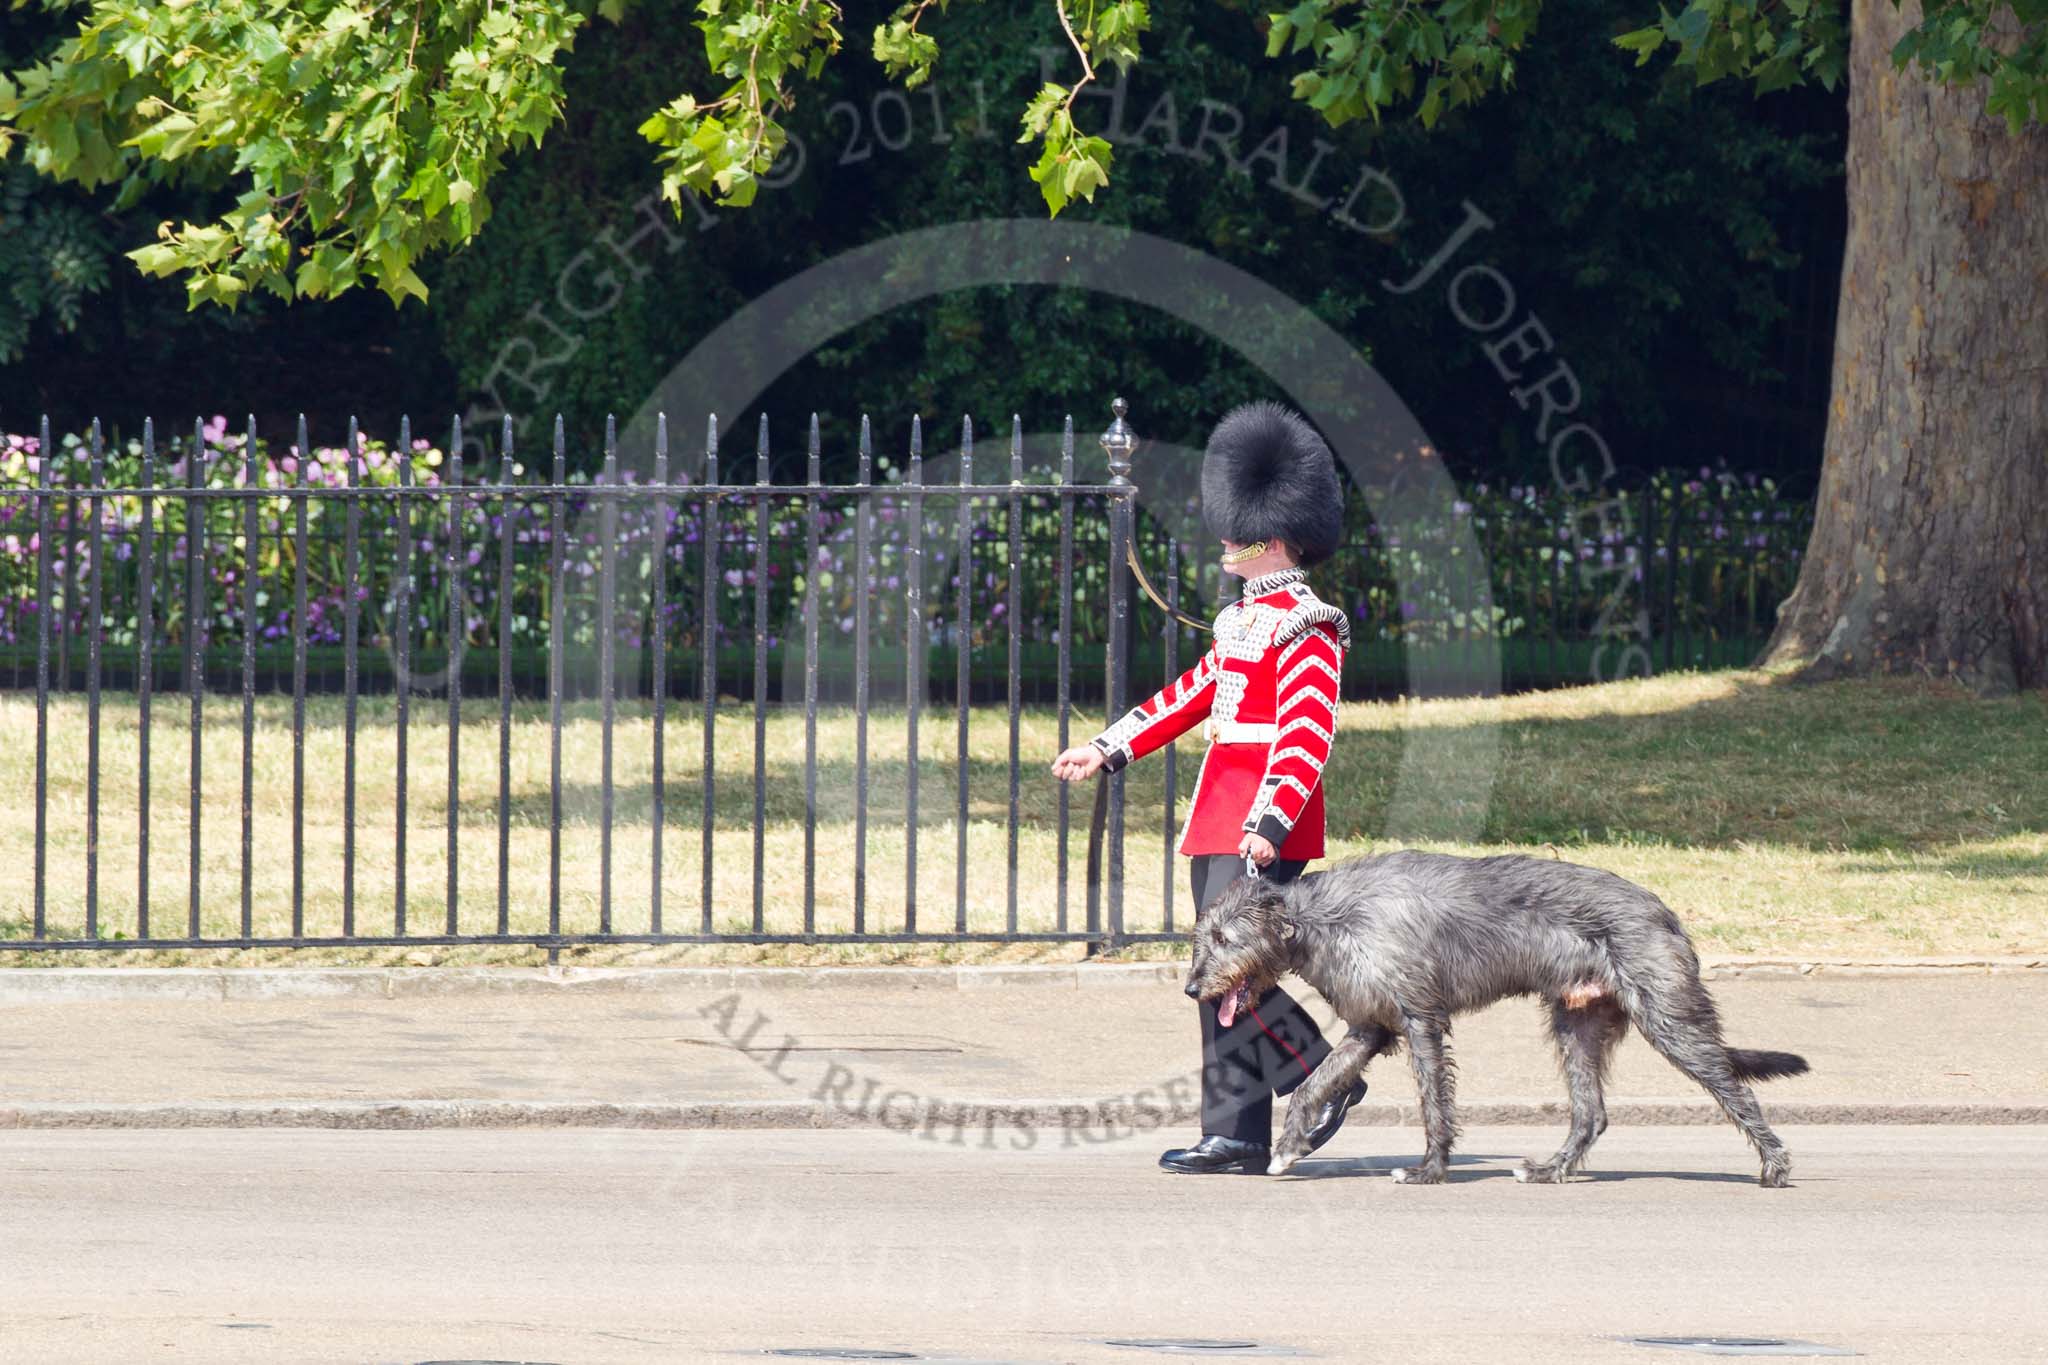 The Colonel's Review 2011: Conmael, an Irish Wolfhound, the Mascot of the Irish Guards, with his handler, a Drummer from the Irish Guards..
Horse Guards Parade, Westminster,
London SW1,

United Kingdom,
on 04 June 2011 at 10:11, image #6